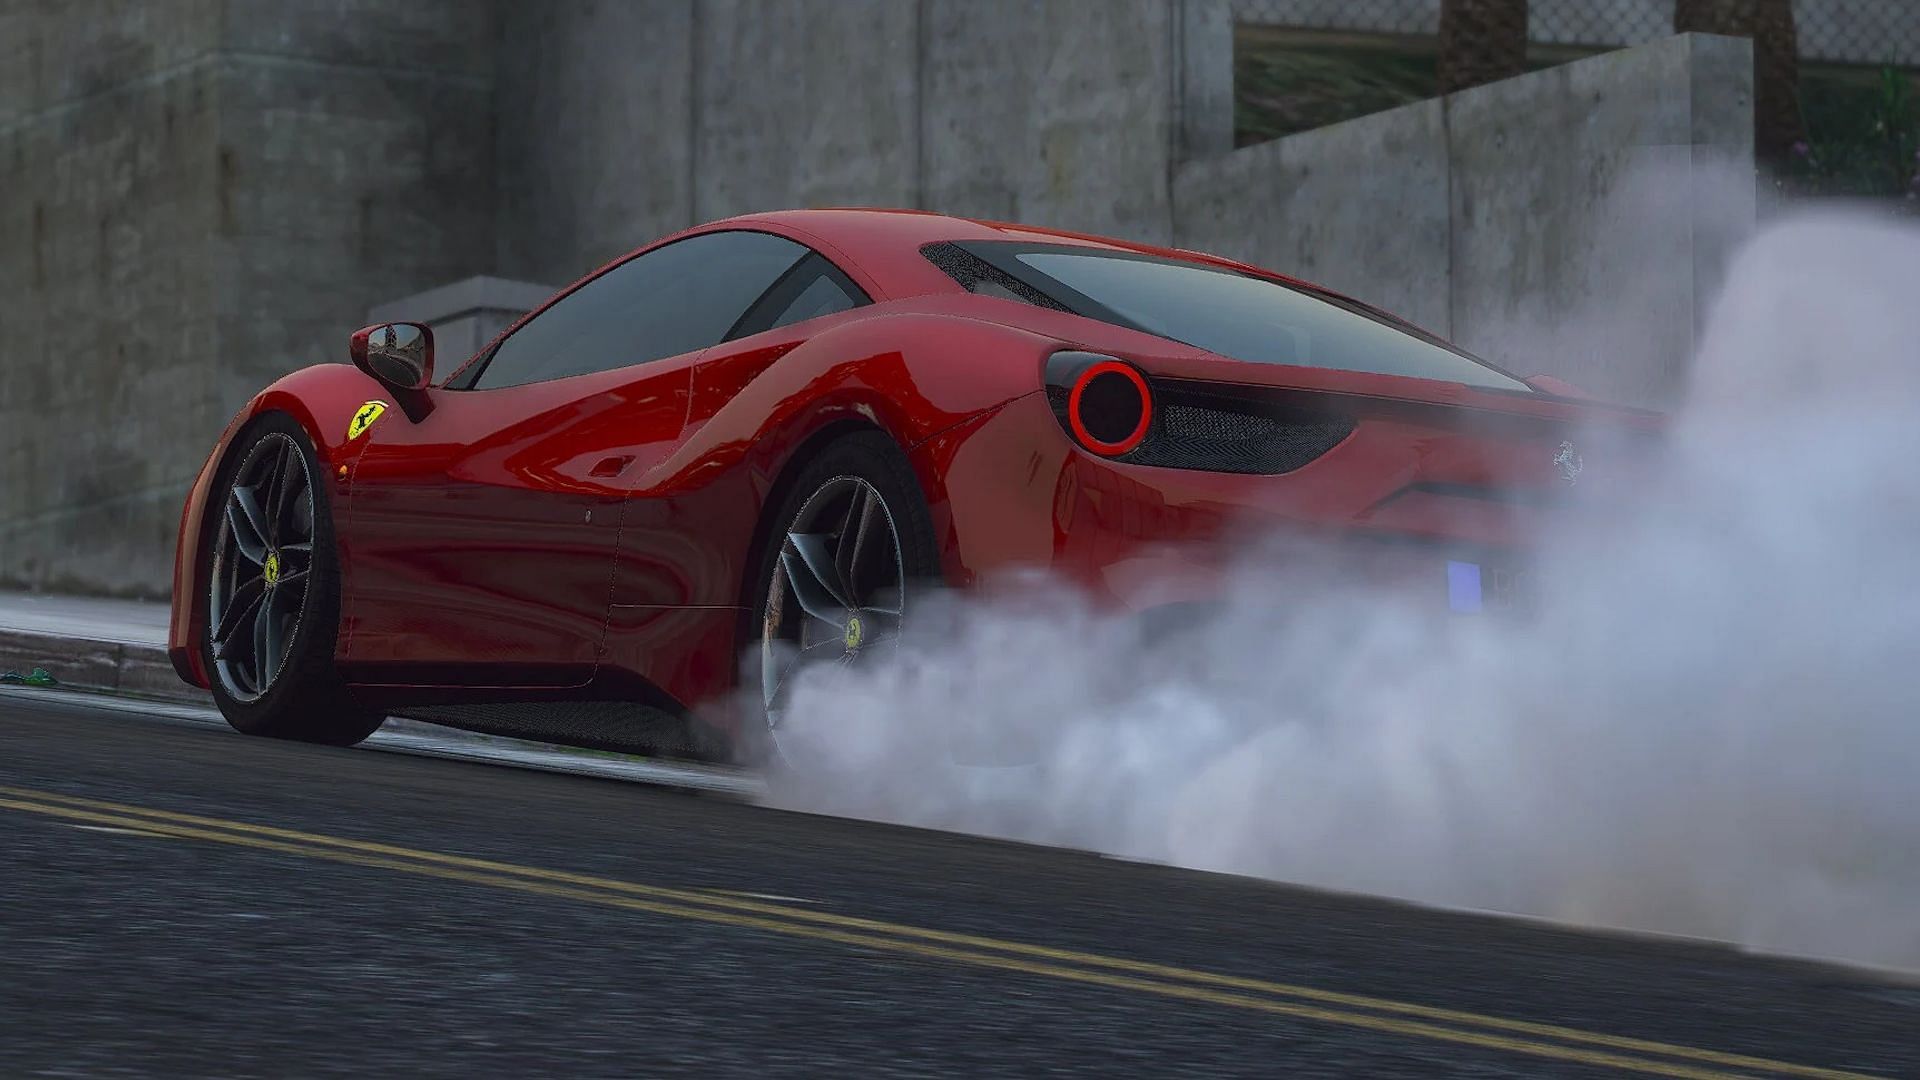 Say goodbye to real-life cars in many servers